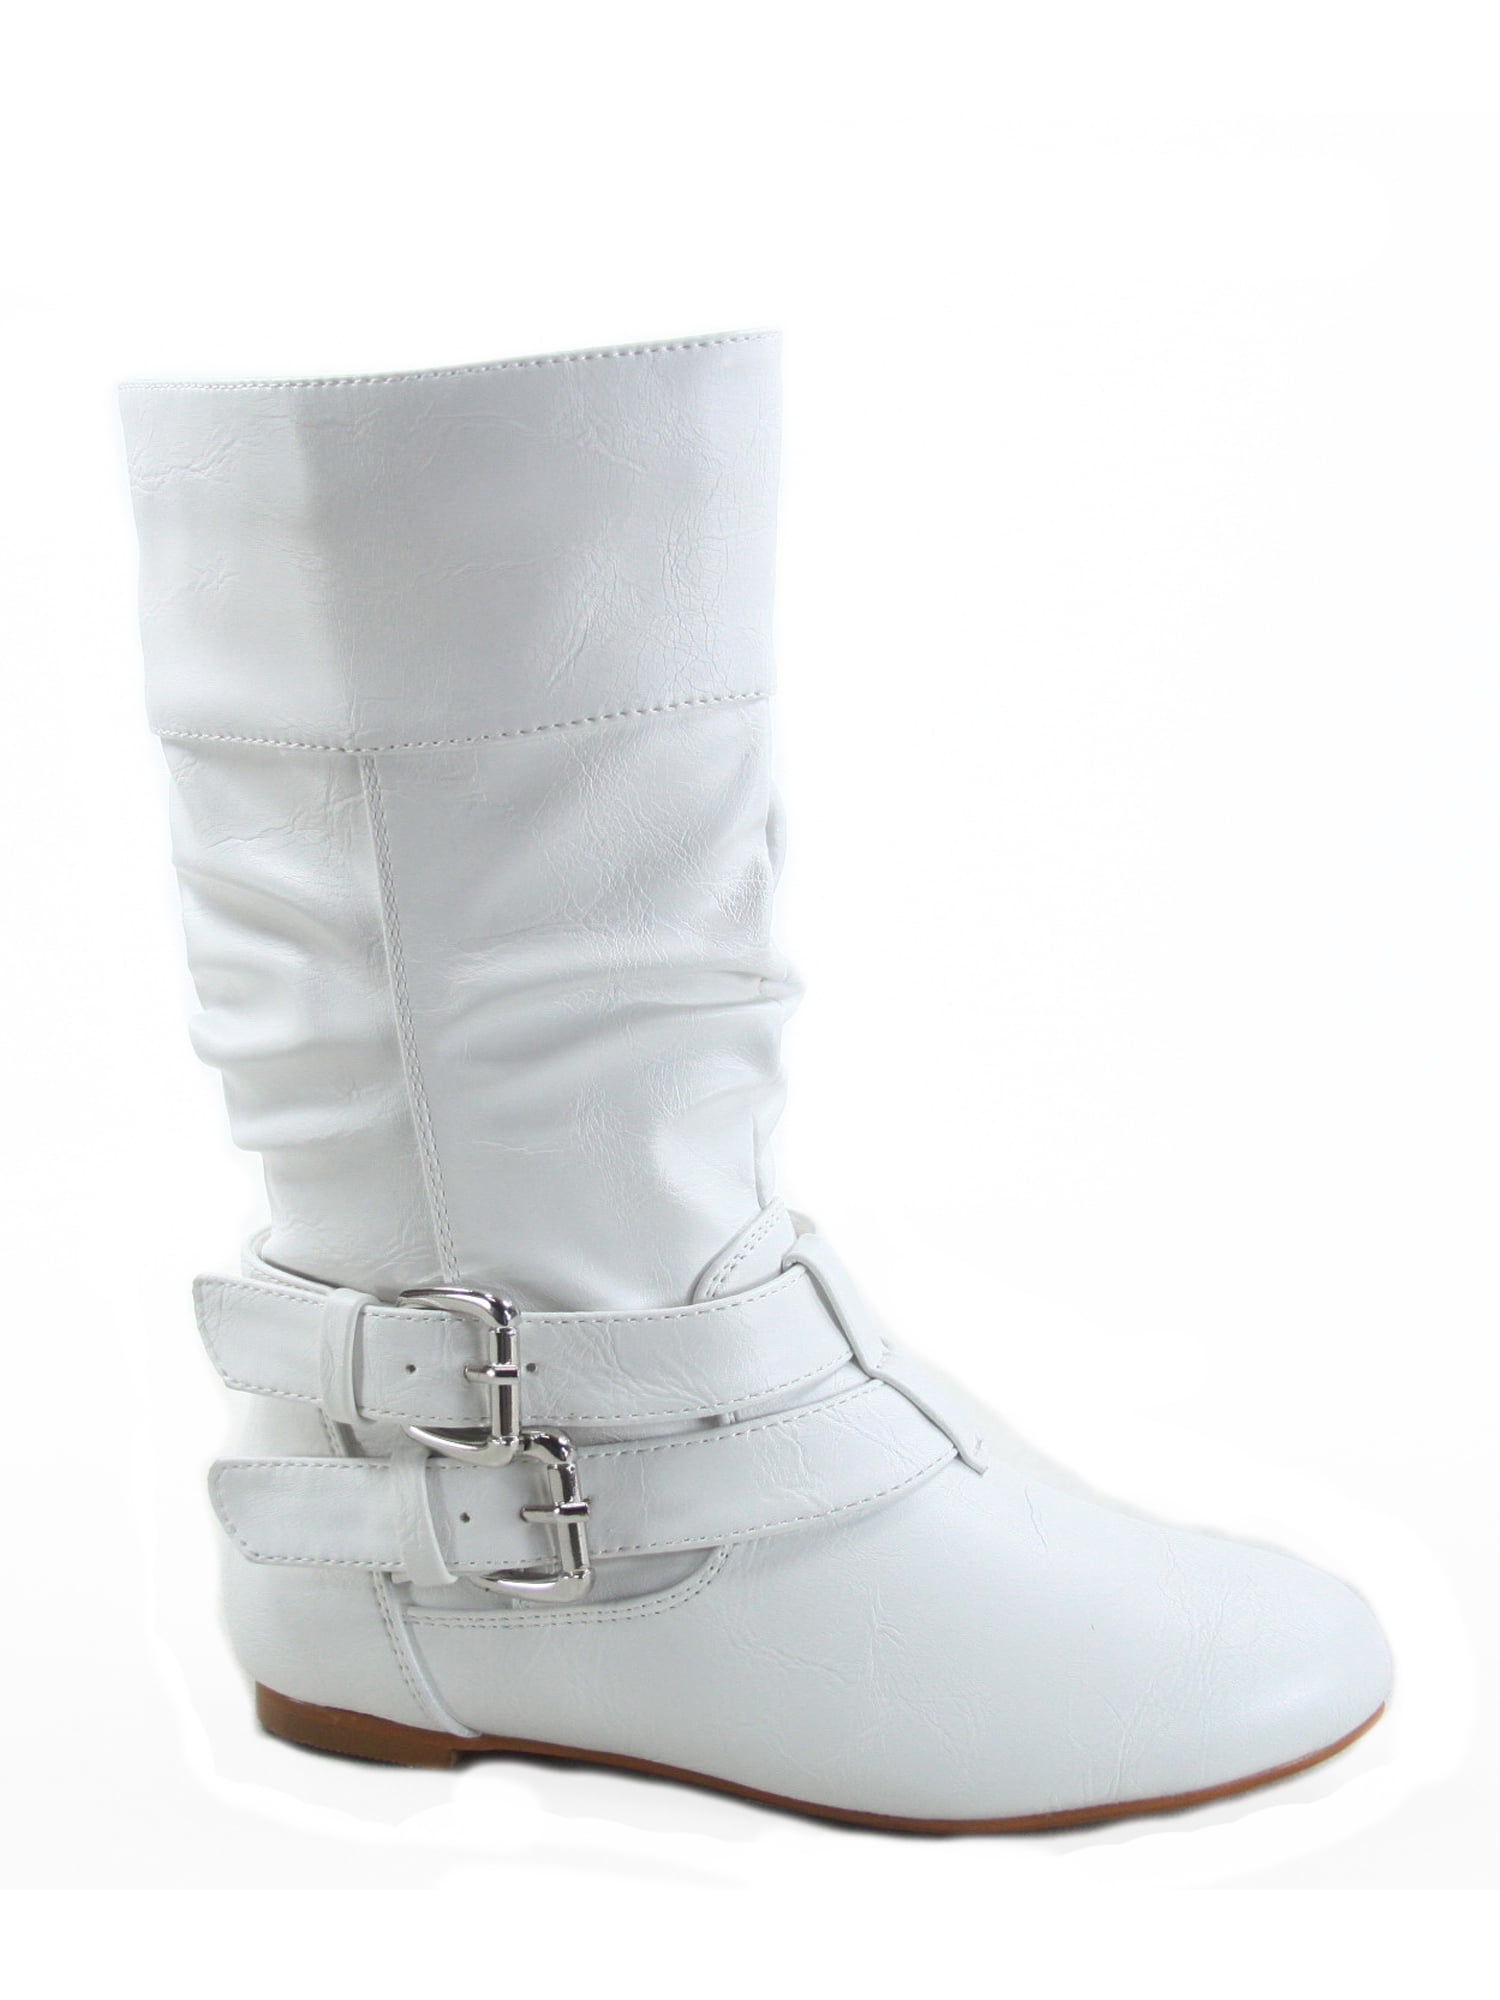 Details about   Womens Fashion Buckle Square Toe Zip Block Heel Knee High Riding Boots Shoes D 